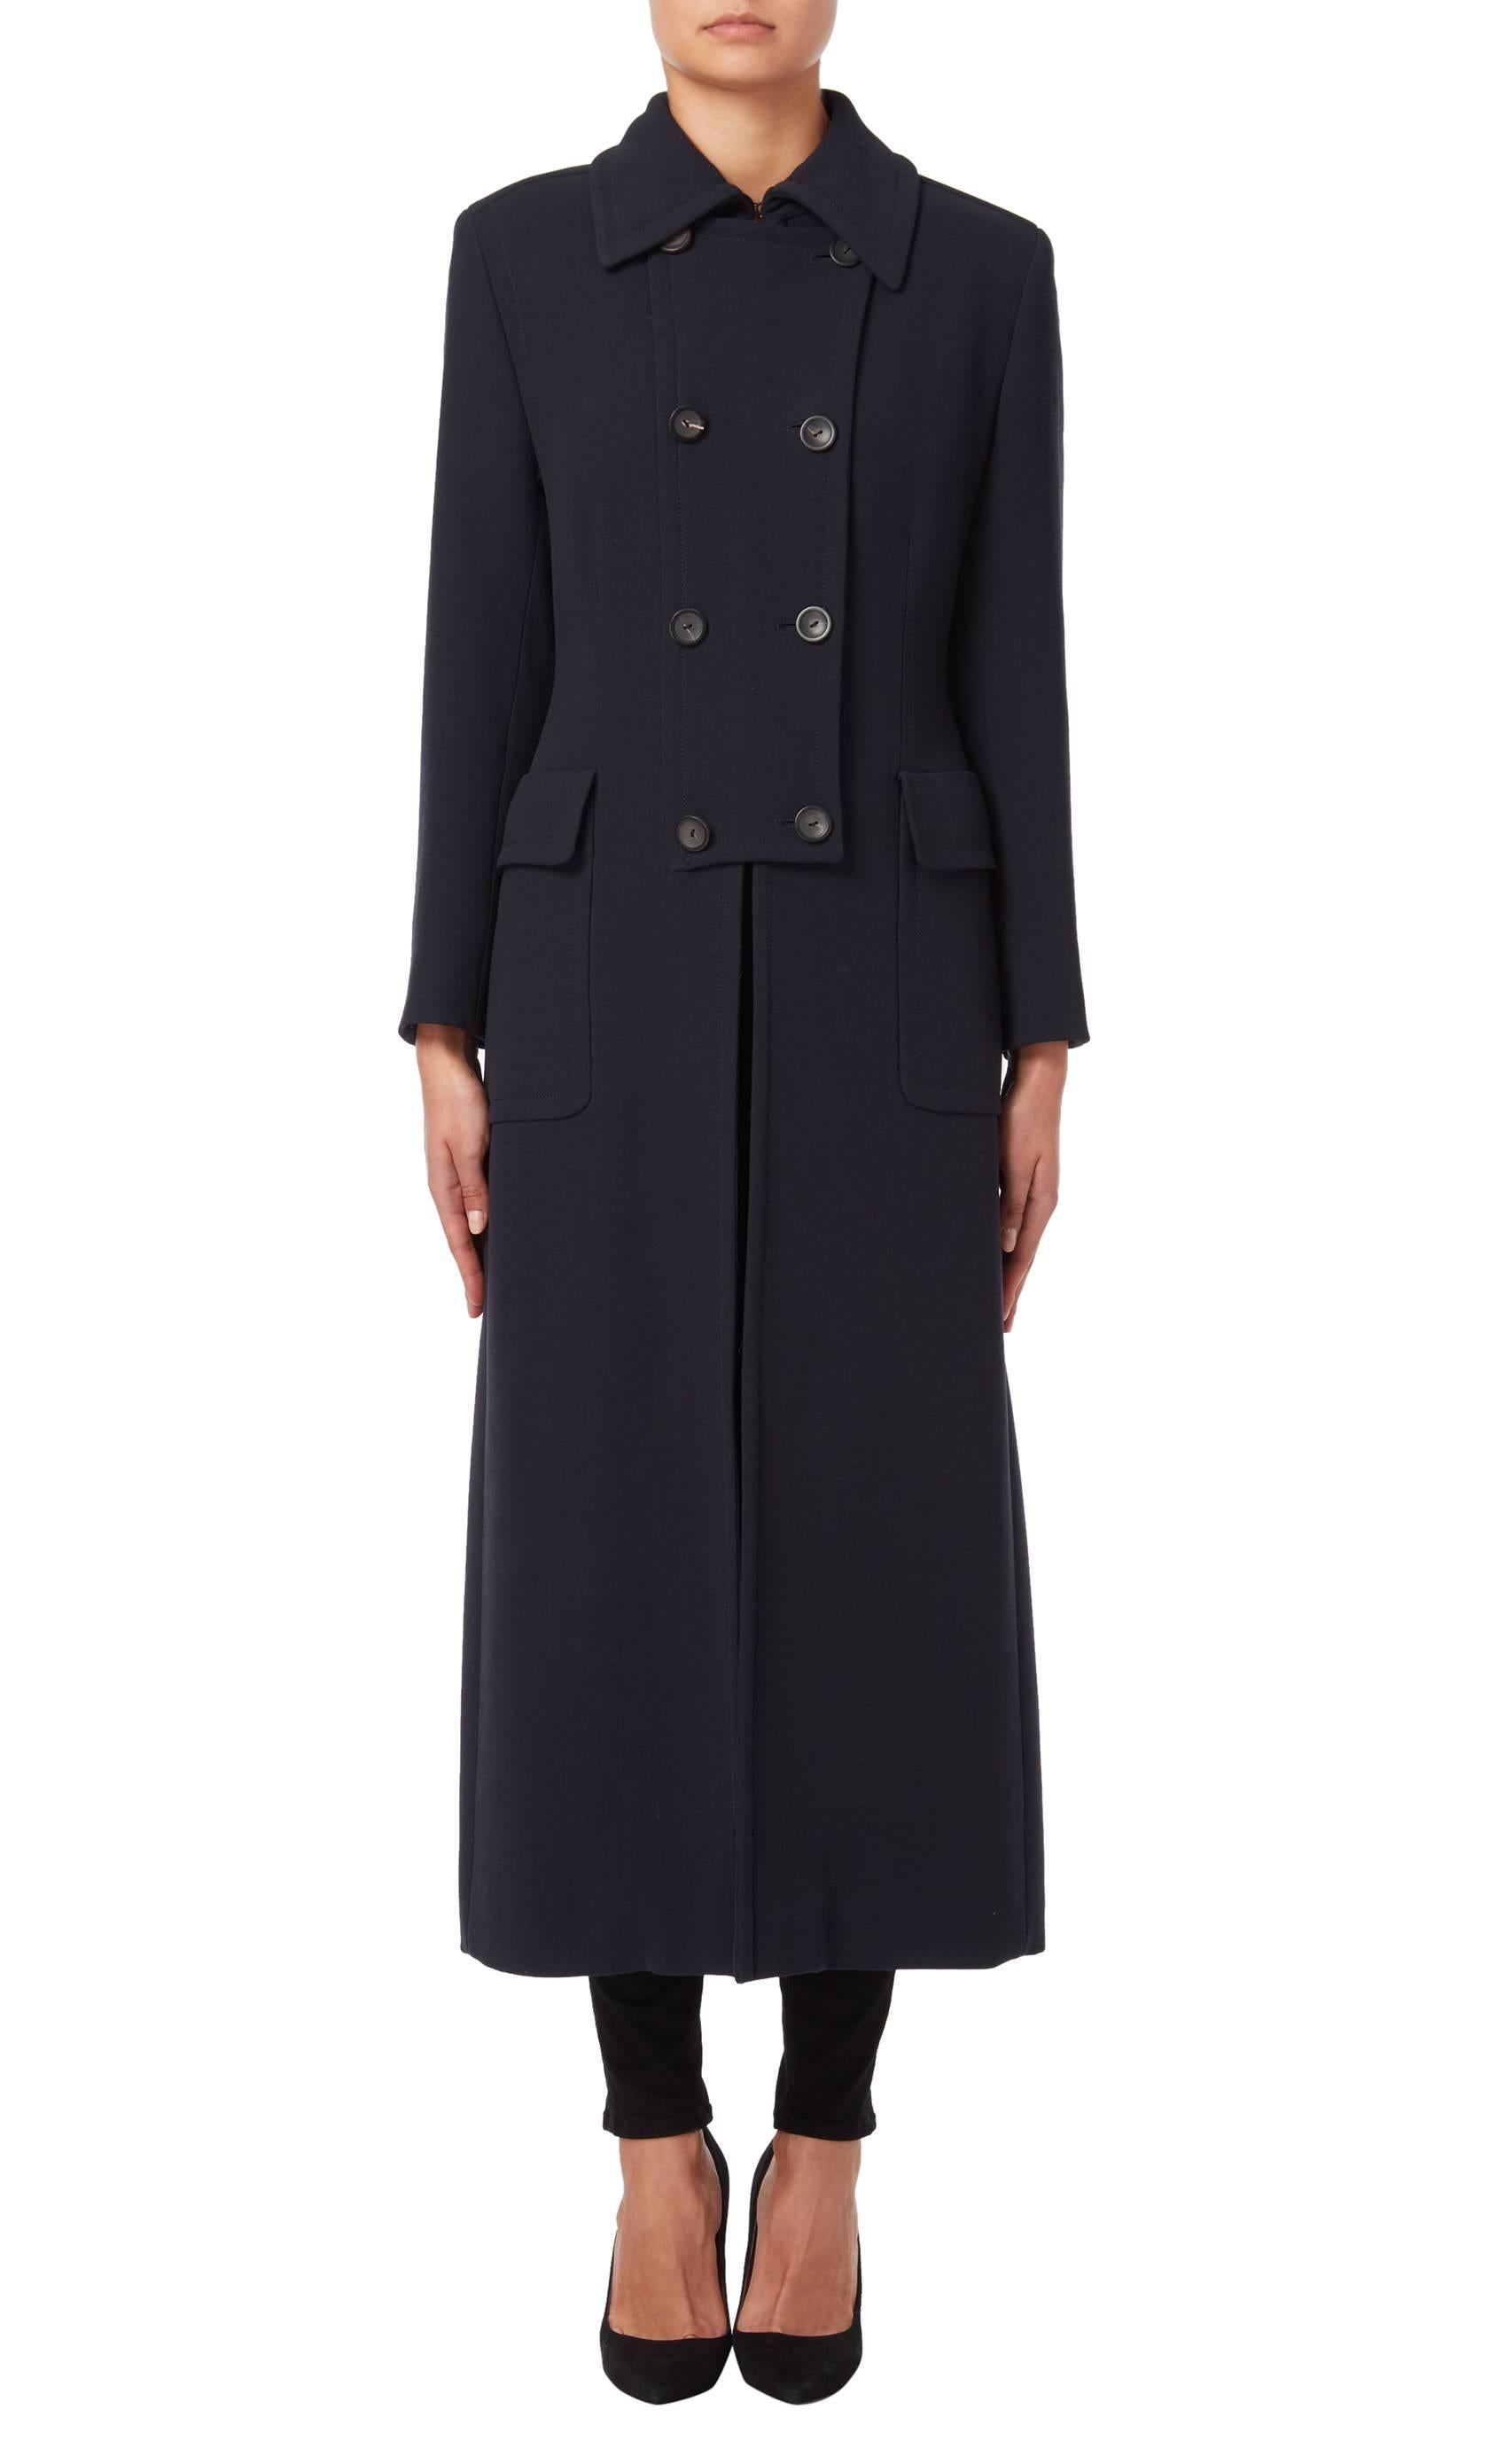 Navy military inspired overcoat by Tom Ford for Gucci from the Autumn/Winter 1996 collection. The coat features a silver metal clip detailing to the back, embossed with the Gucci logo. The coat is constructed of   wool with Zip fastening to the